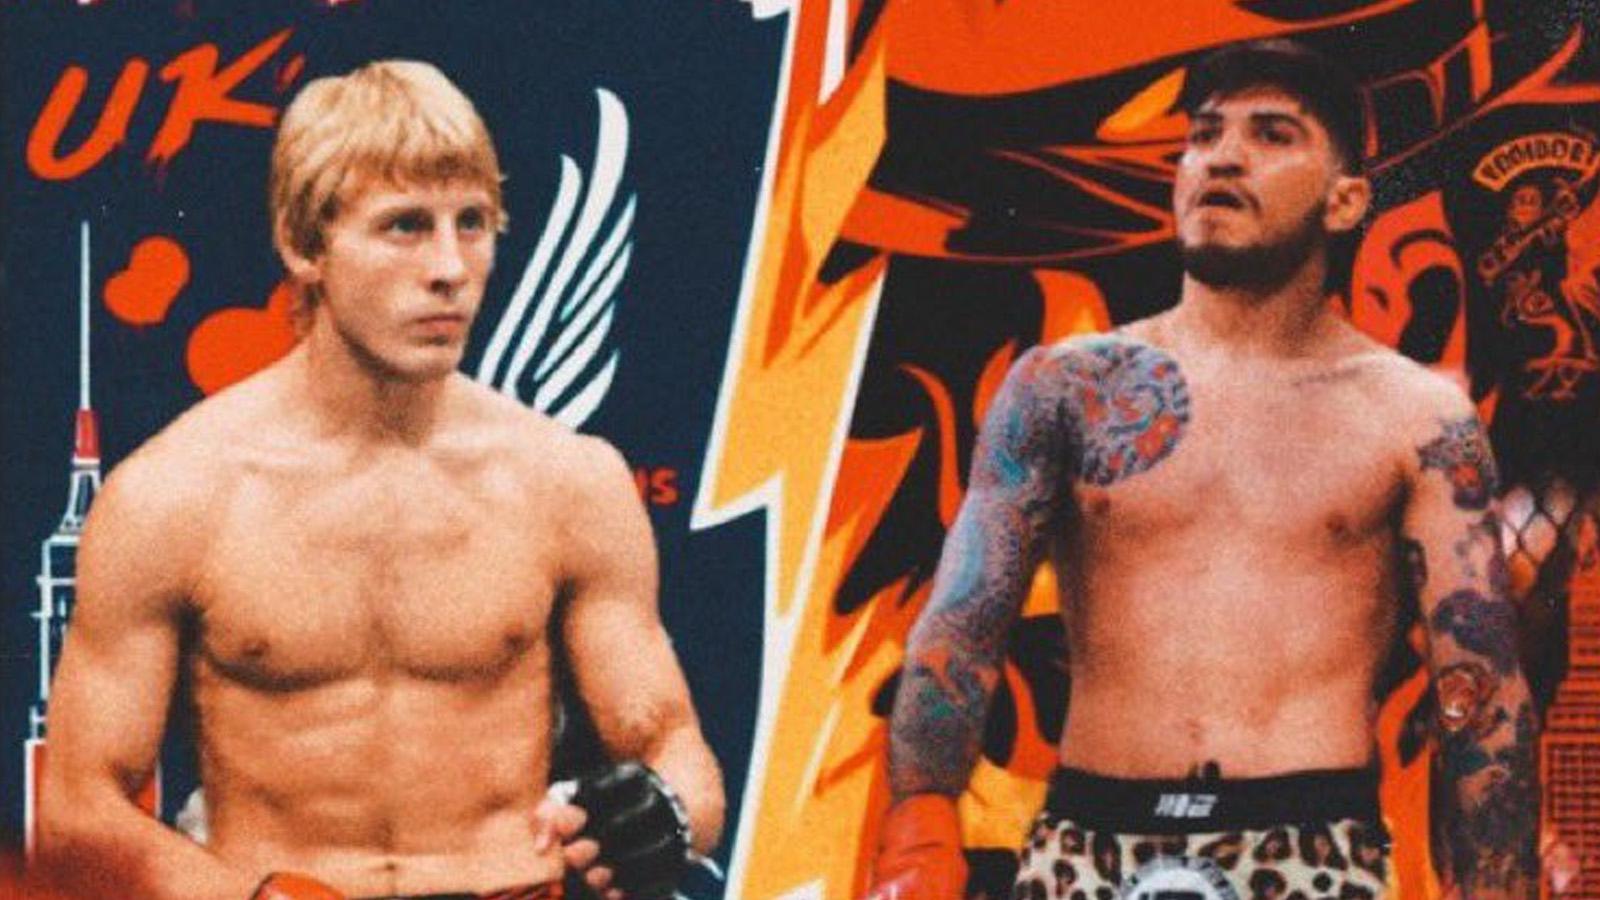 Dillon Danis roasted after pitching UFC debut against Paddy Pimblett